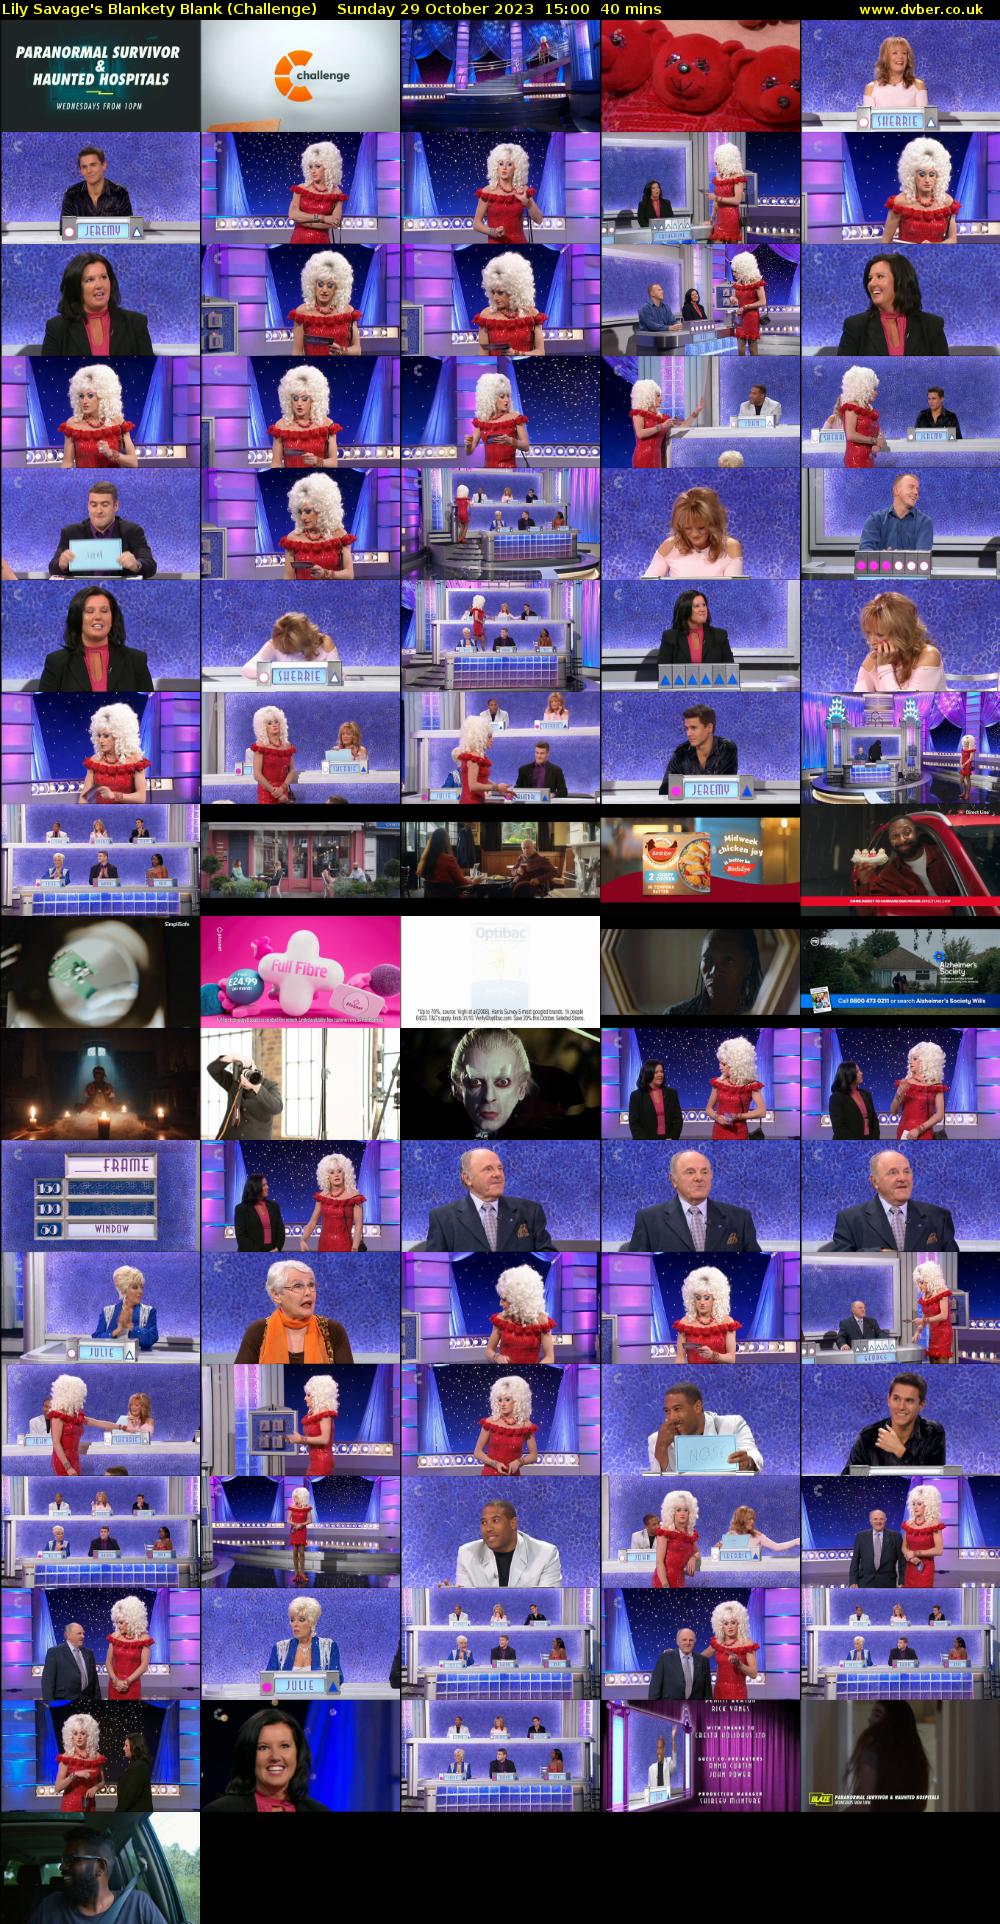 Lily Savage's Blankety Blank (Challenge) Sunday 29 October 2023 15:00 - 15:40